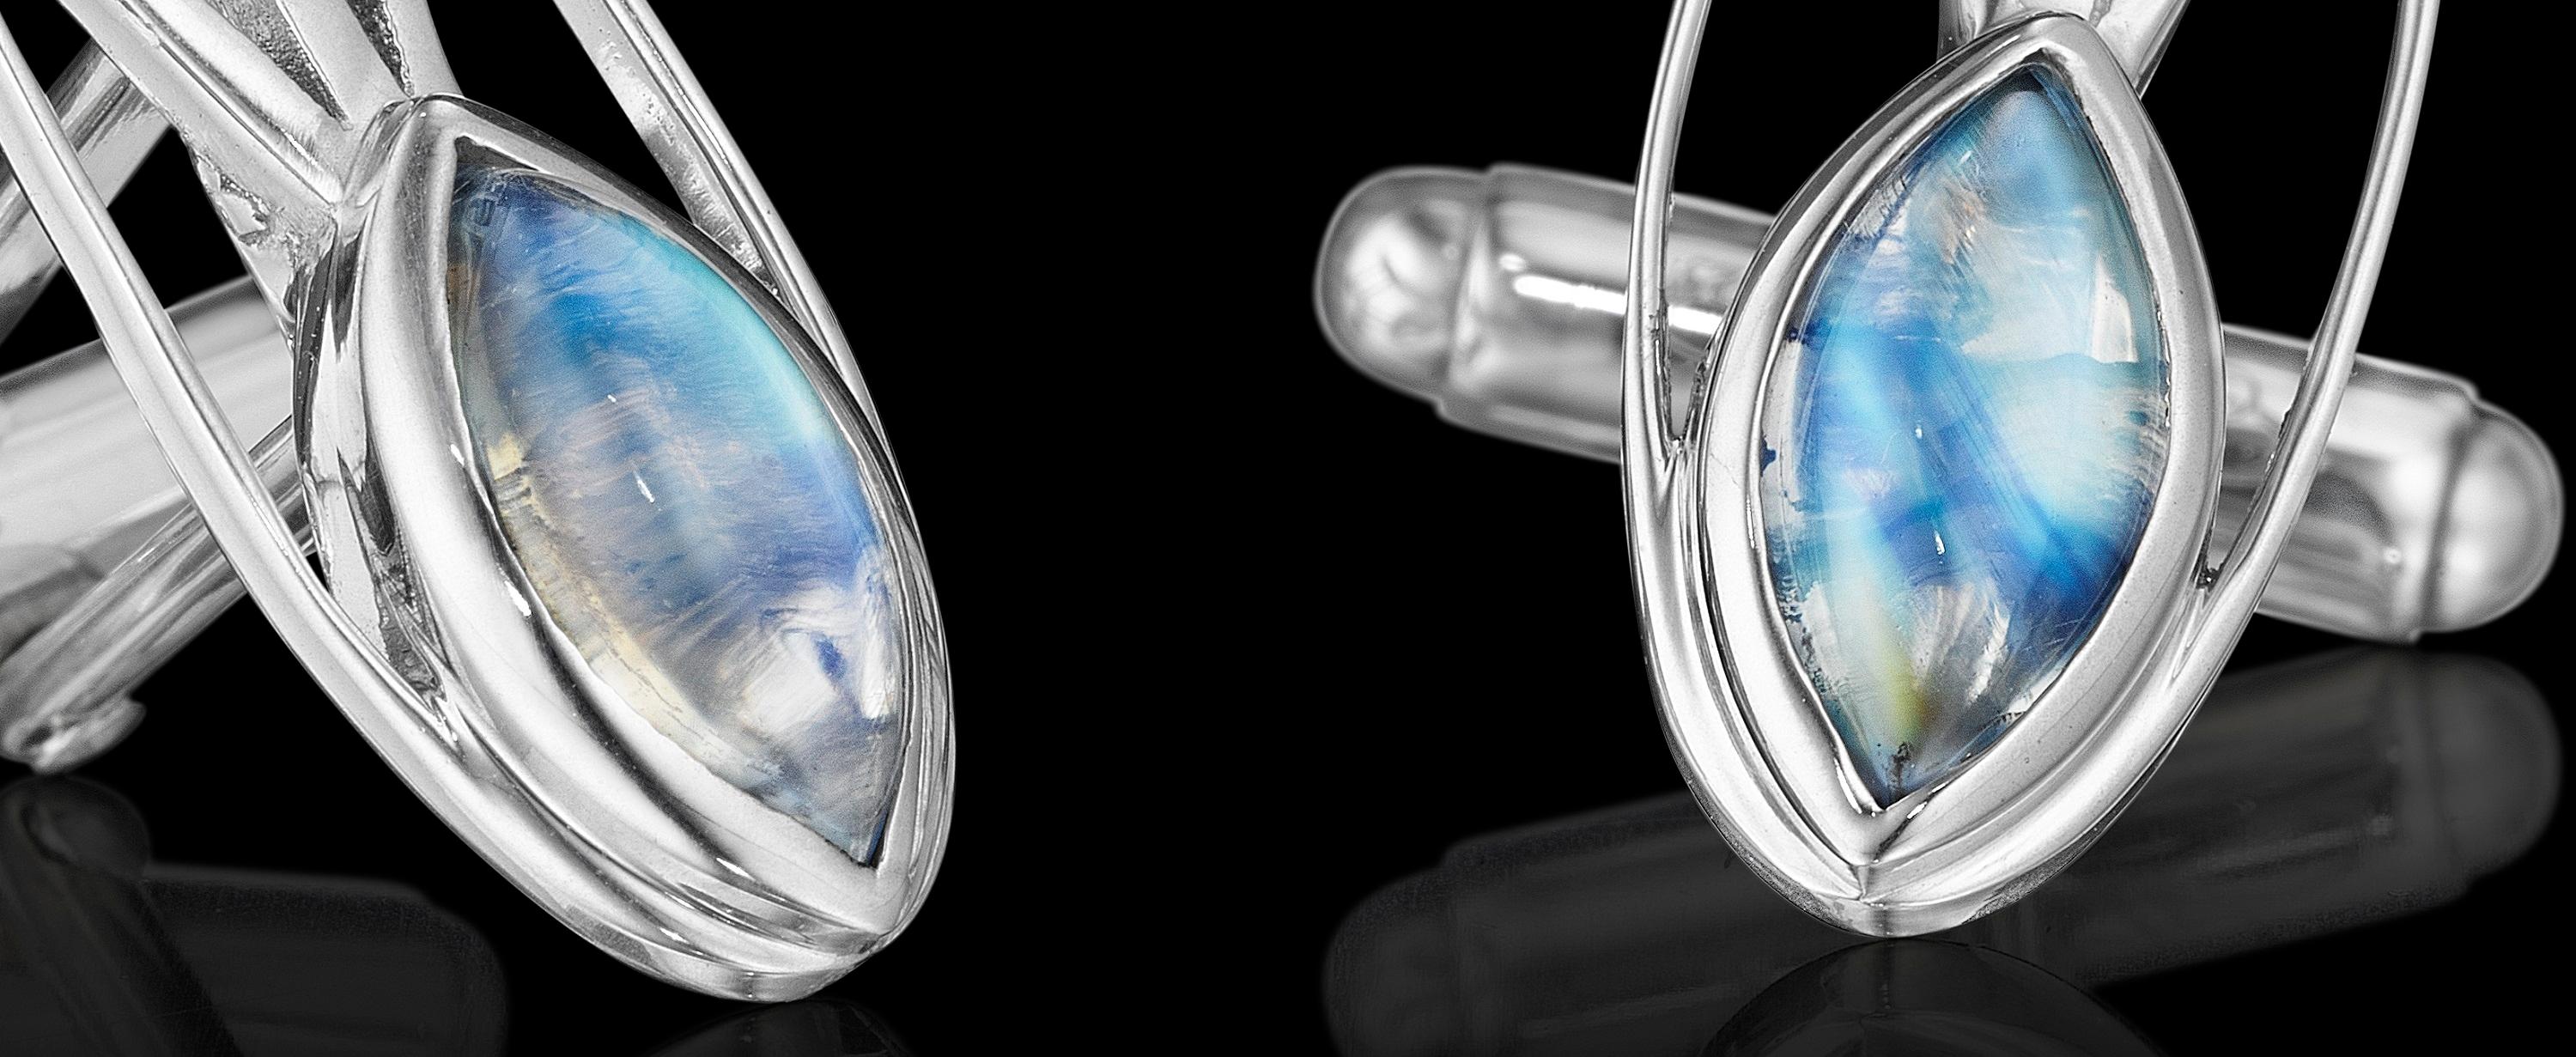 Yoki Sophisticated Blue Moonstone Sterling Silver Cufflinks In New Condition For Sale In Annandale, VA